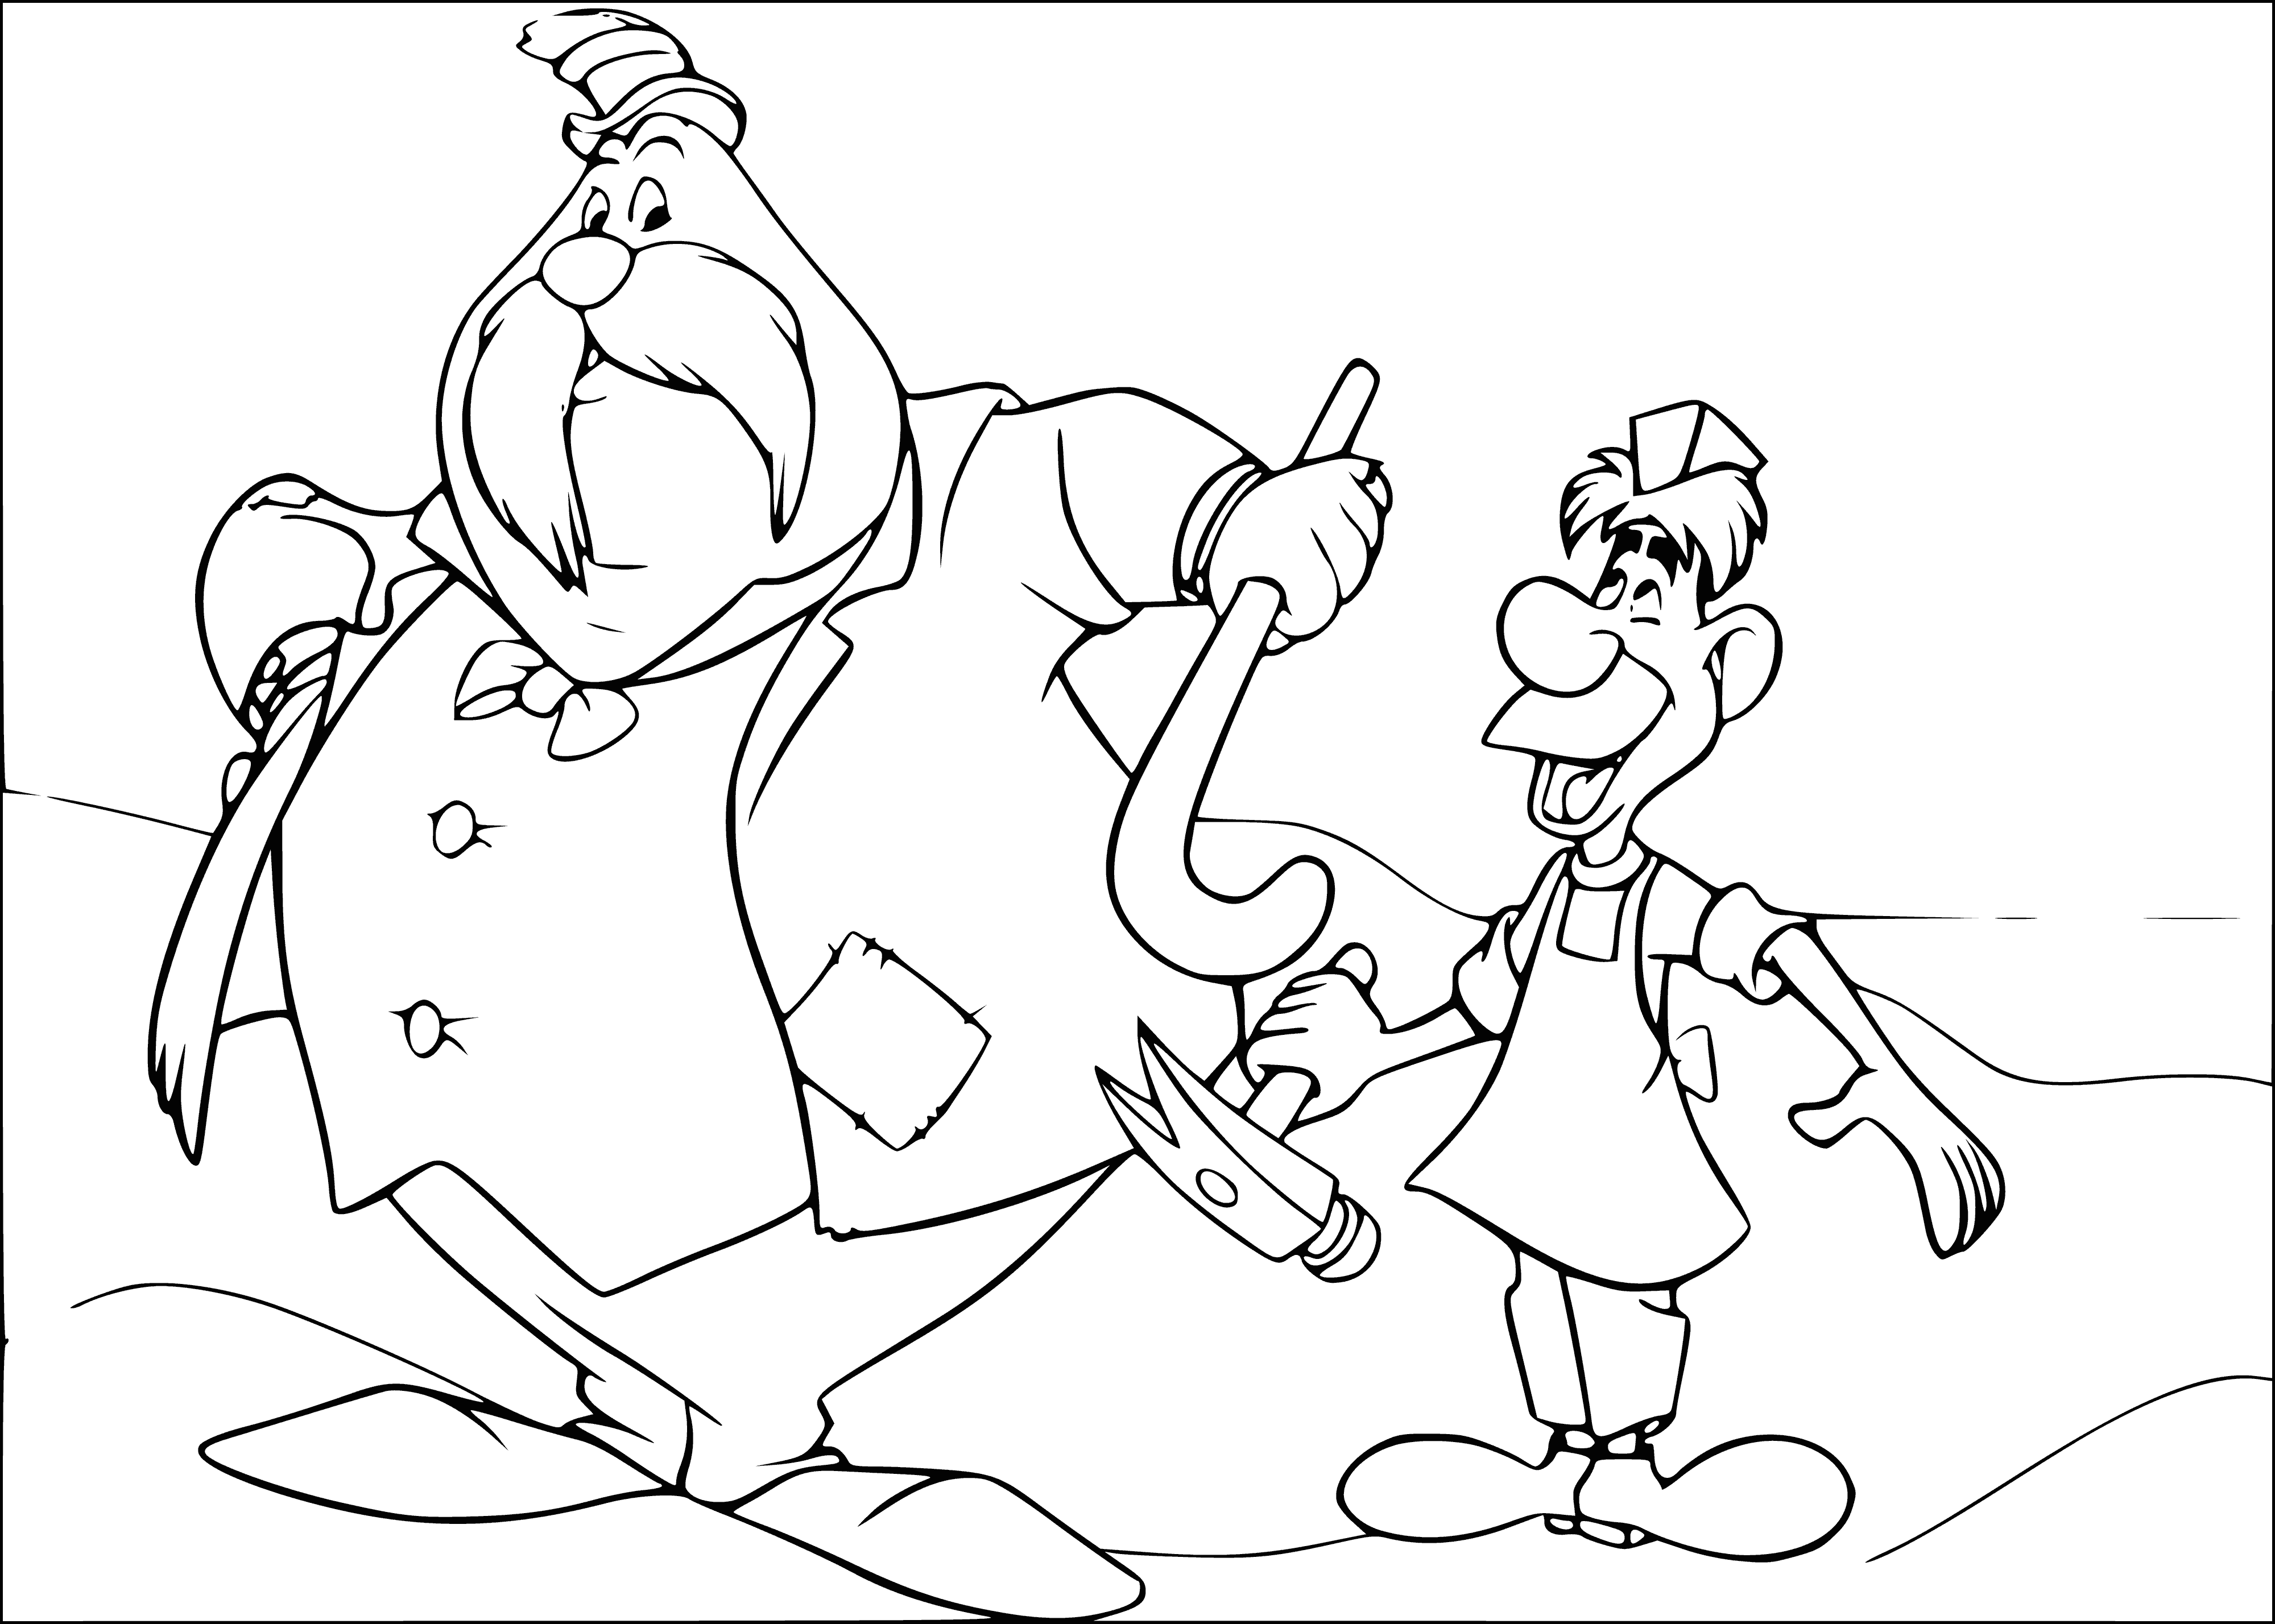 coloring page: The Walrus and Carpenter from "Alice in Wonderland" go on a beach walk and the Walrus convinces the Carpenter to eat some oysters by saying they are happy to be eaten.